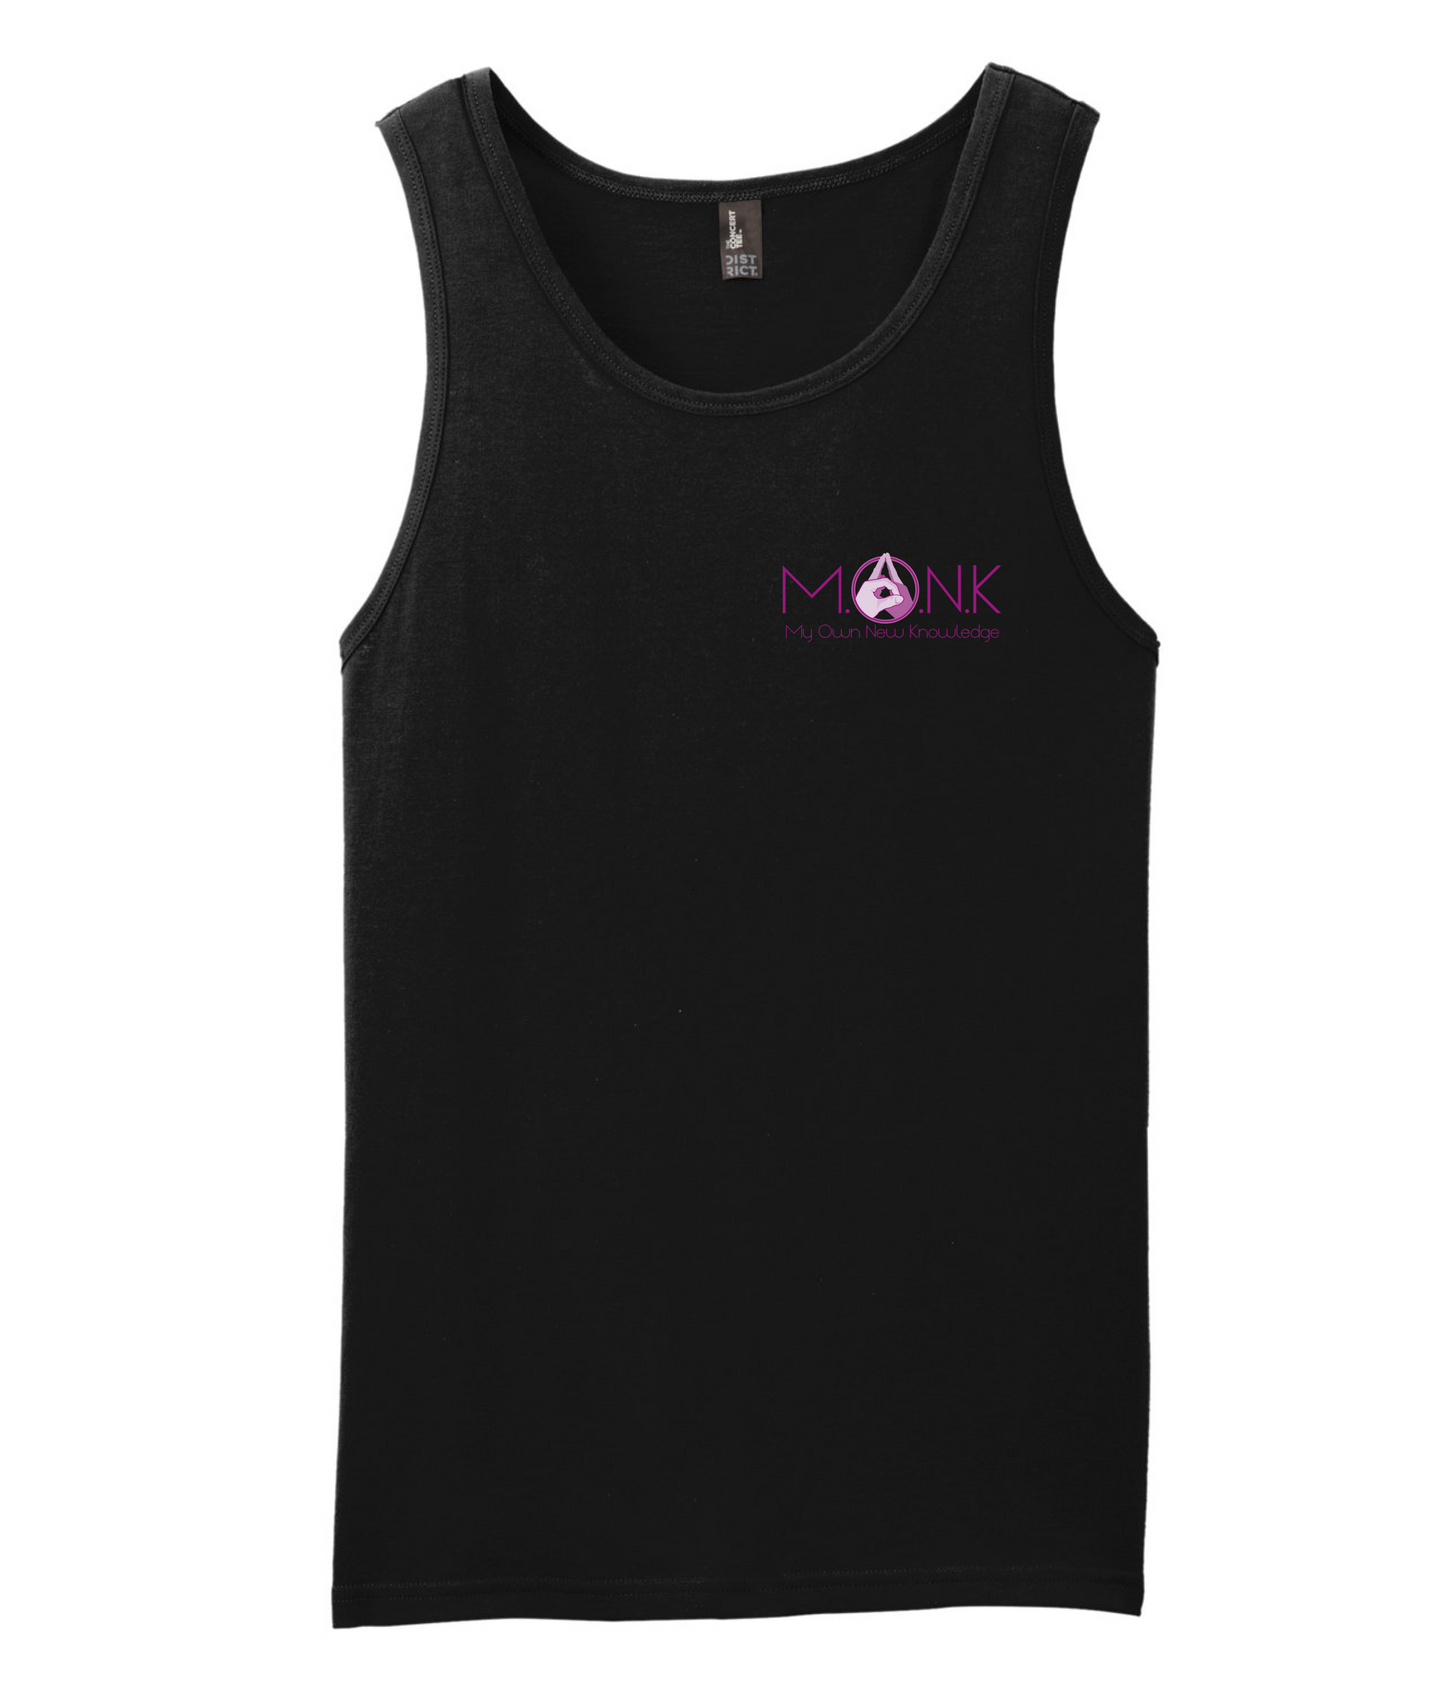 Monk Melville - My Own New Knowledge - Black Tank Top